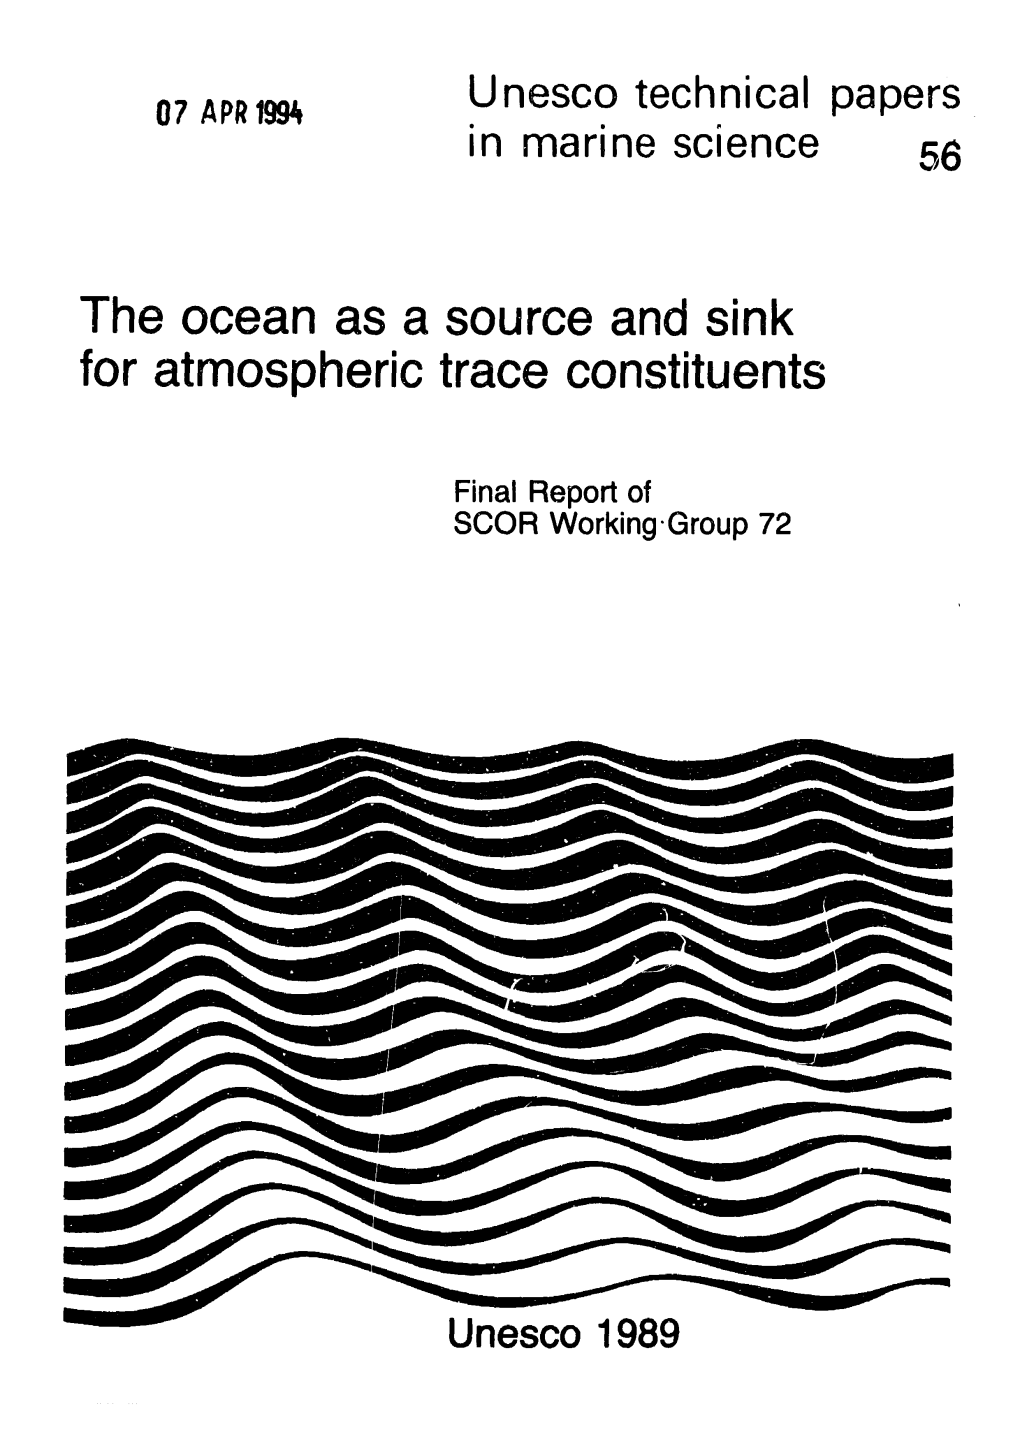 The Ocean As a Source and Sink for Atmospheric Trace Constituents; Final